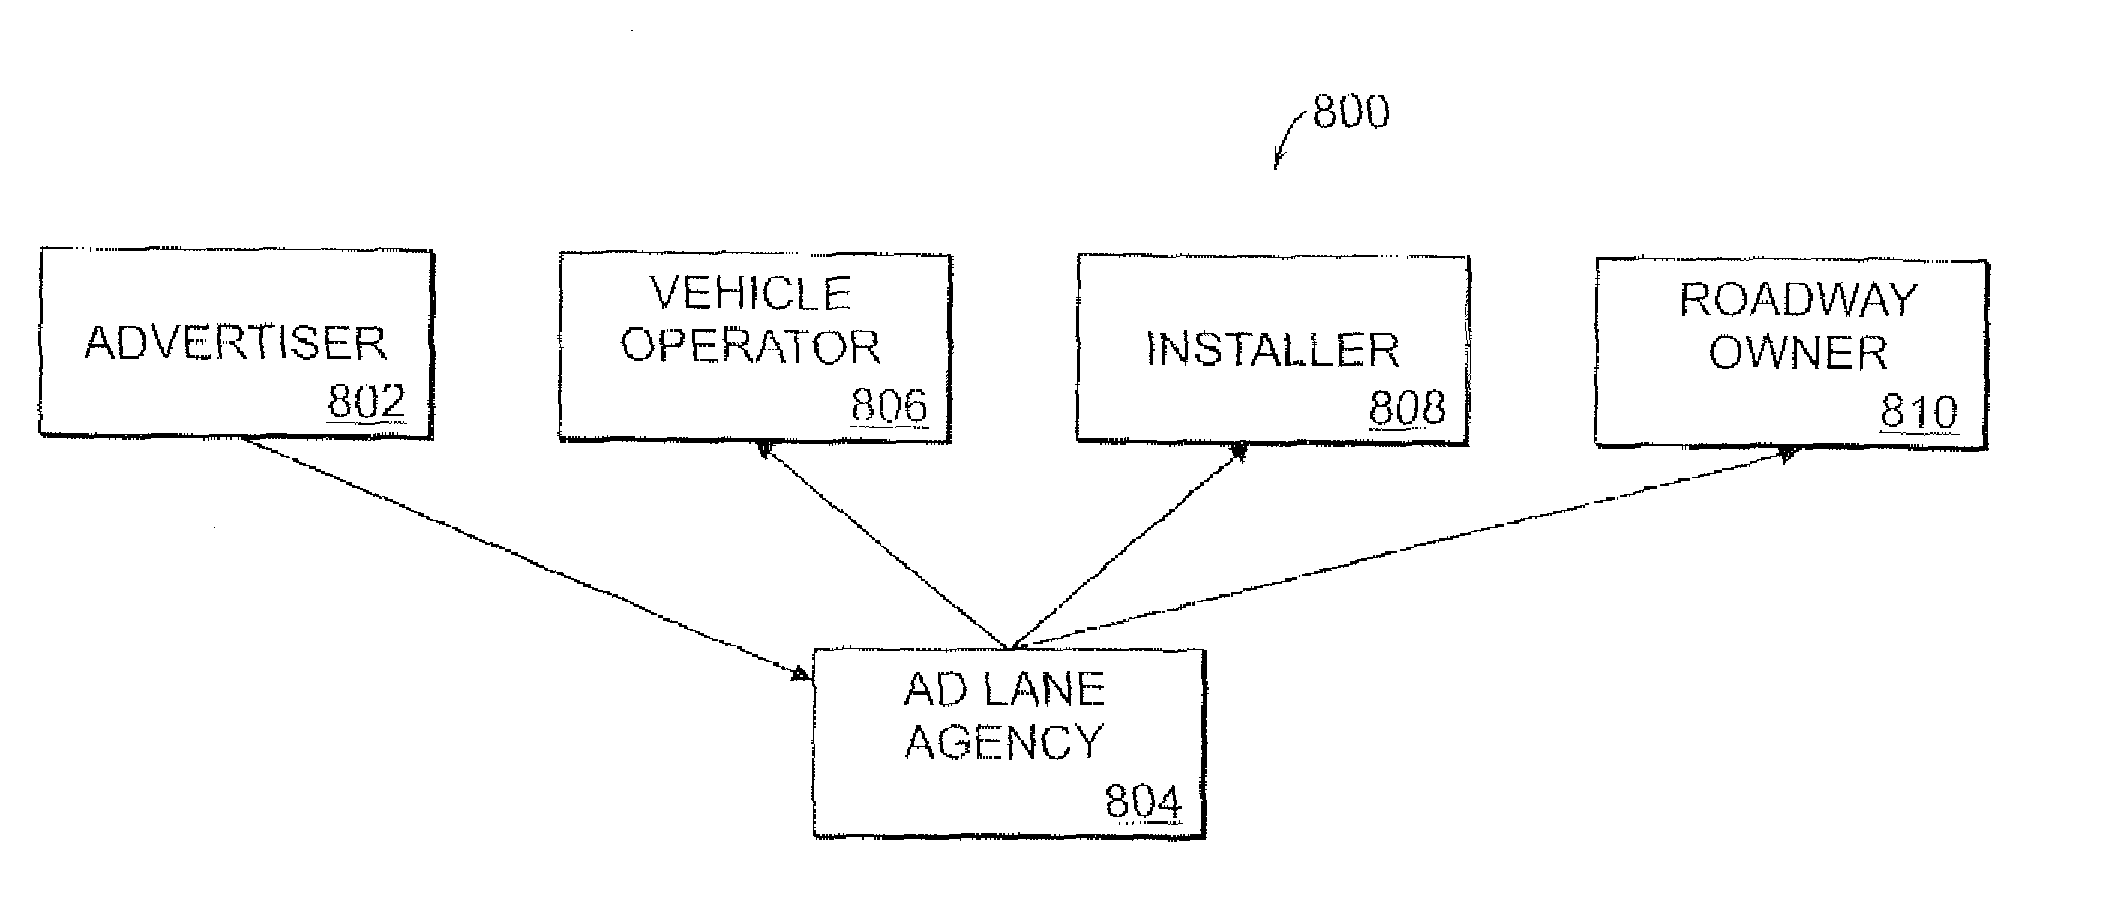 System and Method for Vehicle Advertising Network